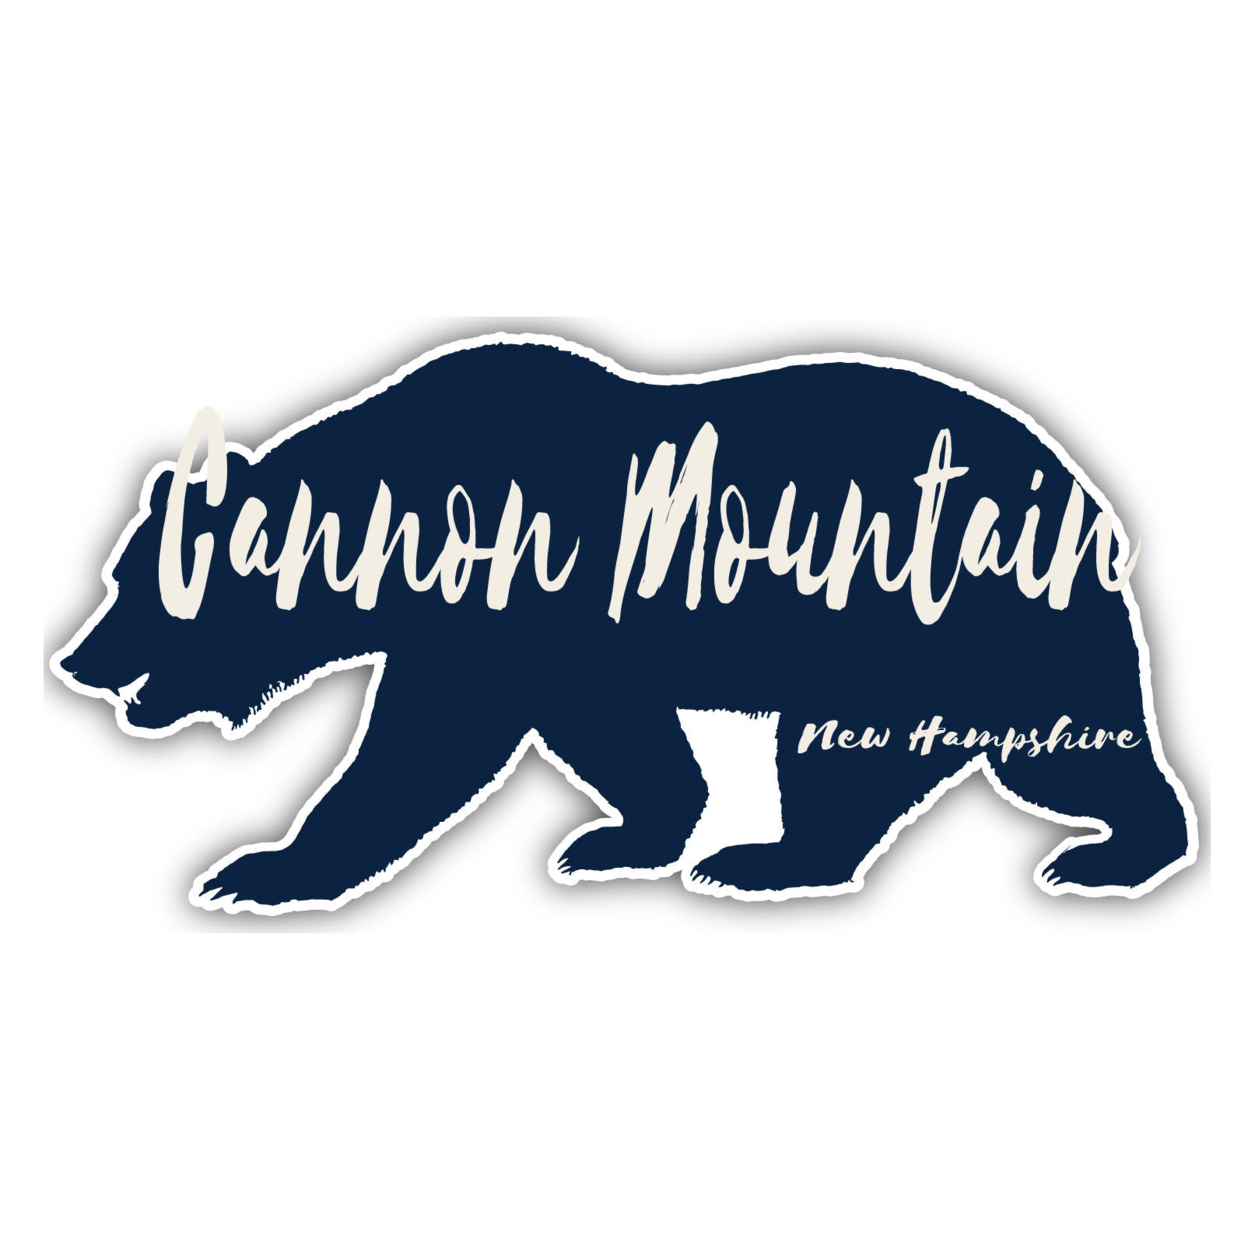 Cannon Mountain New Hampshire Souvenir Decorative Stickers (Choose Theme And Size) - 4-Pack, 10-Inch, Bear